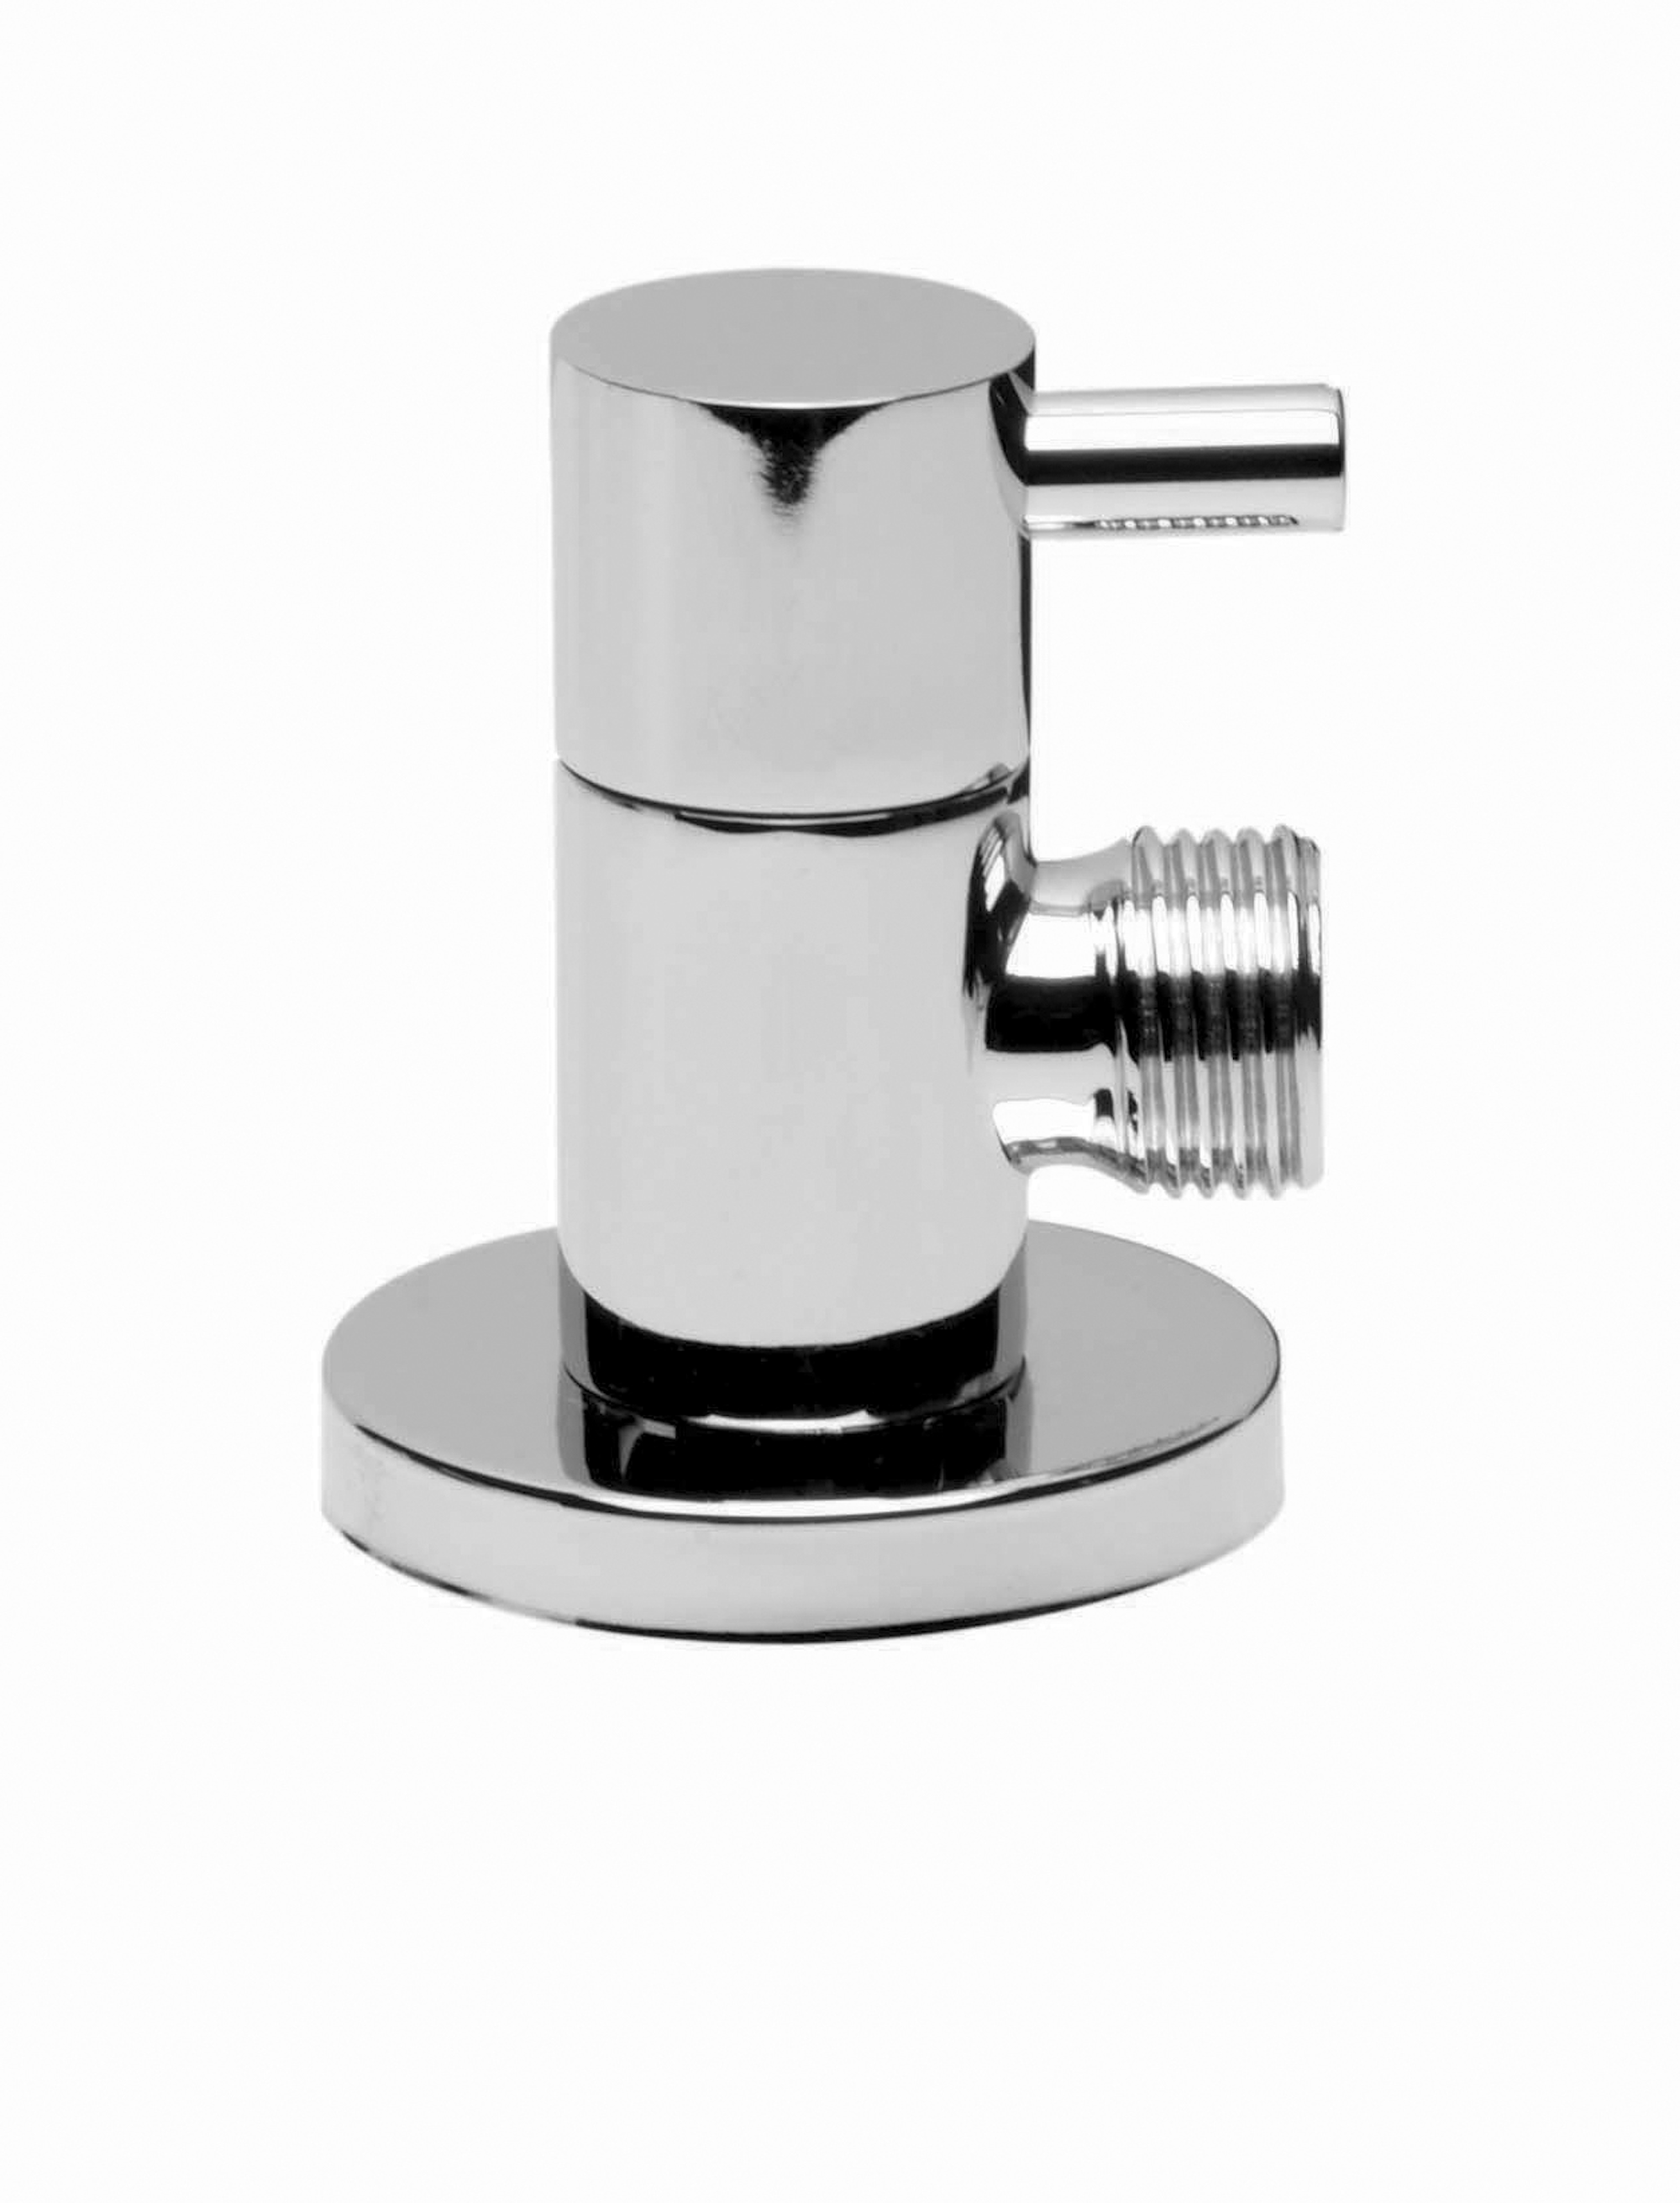 SHOWER outlet elbow with built-in ½" stopcock